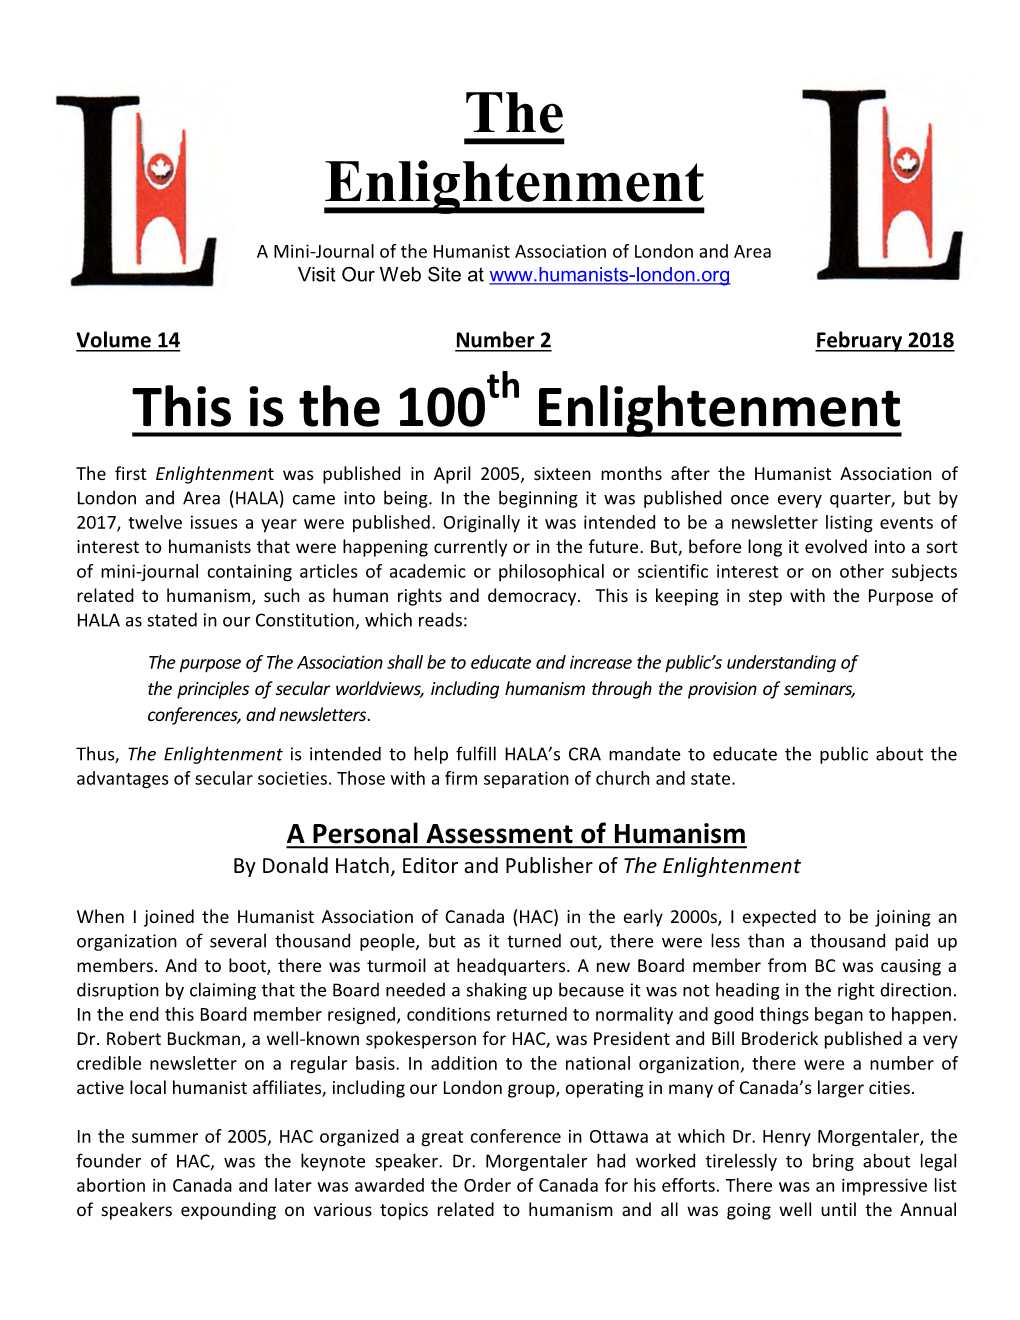 The Enlightenment This Is the 100 Enlightenment